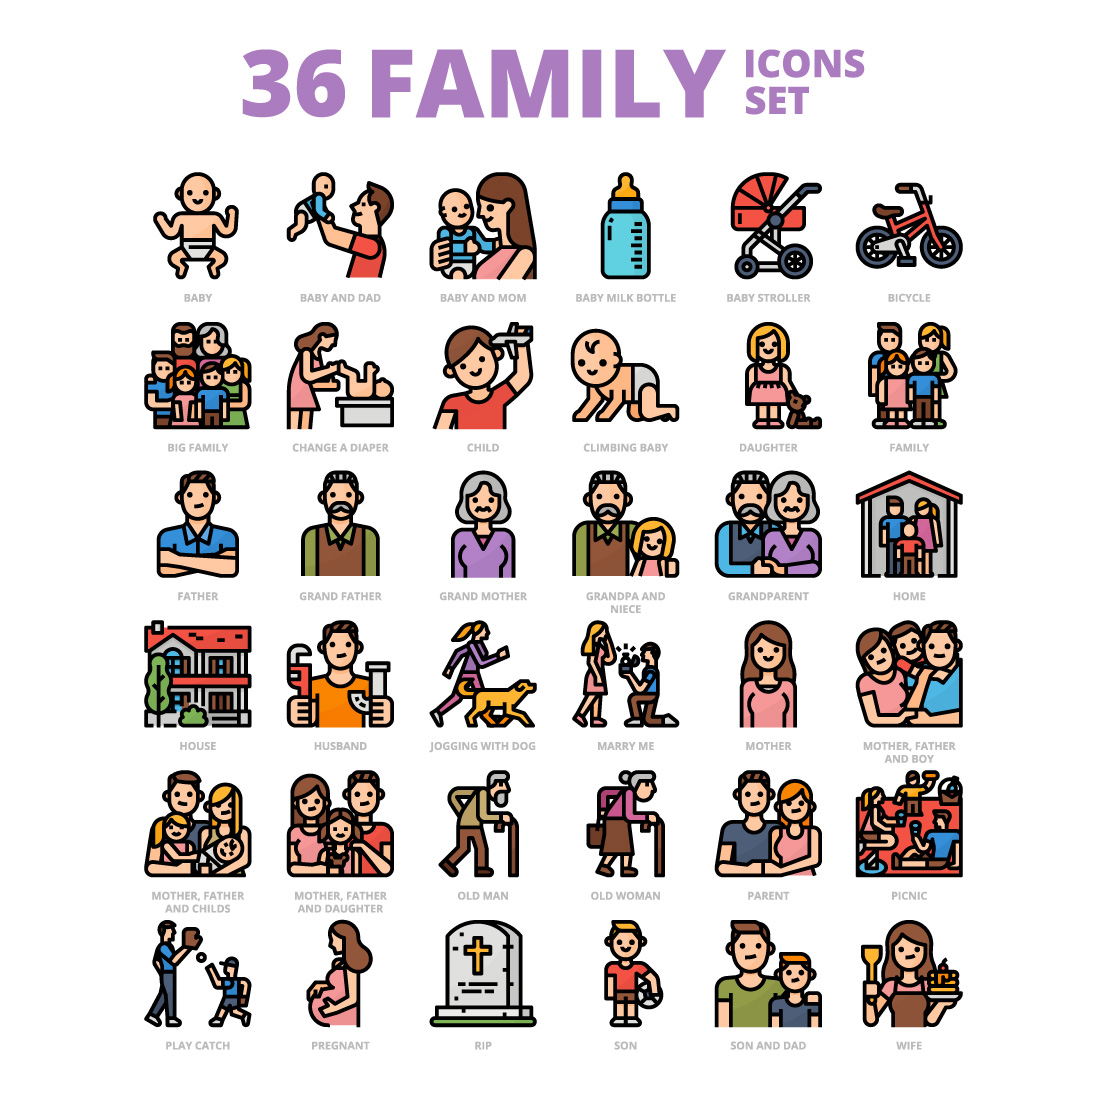 36 Family Icons Set x 4 Styles cover image.